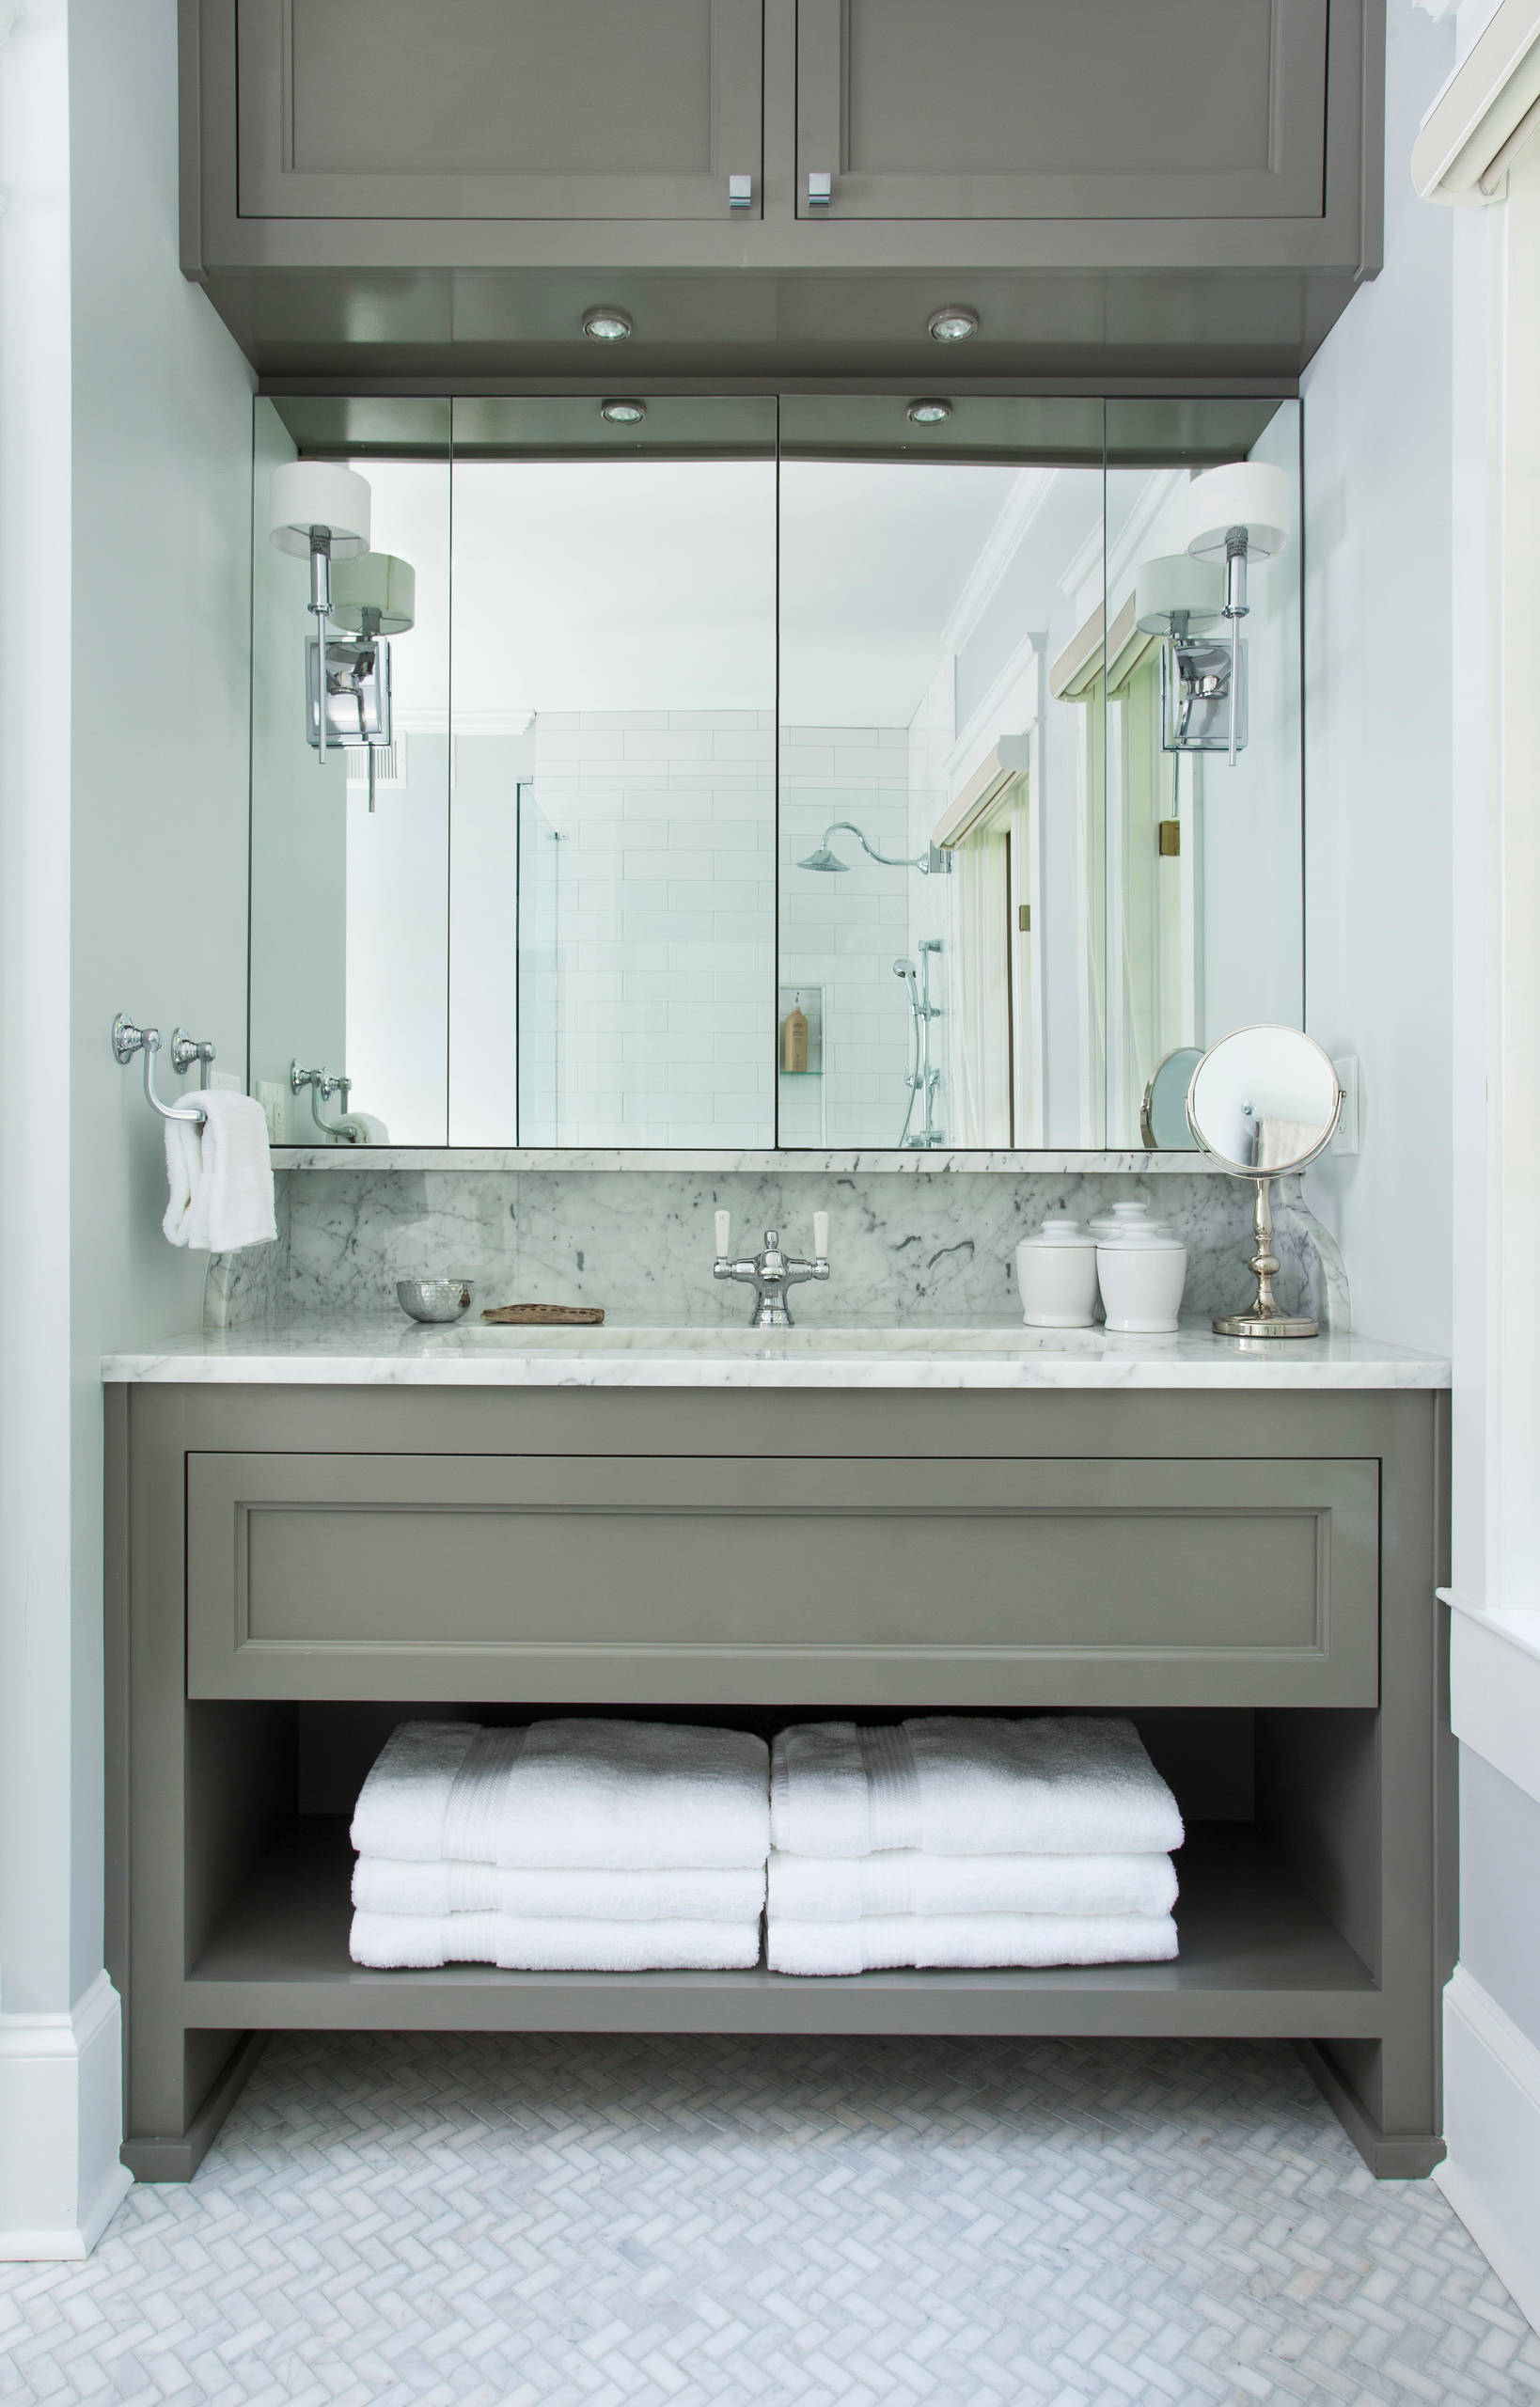 Vanity Height More A Guide To The, How Tall Should Your Bathroom Mirror Be